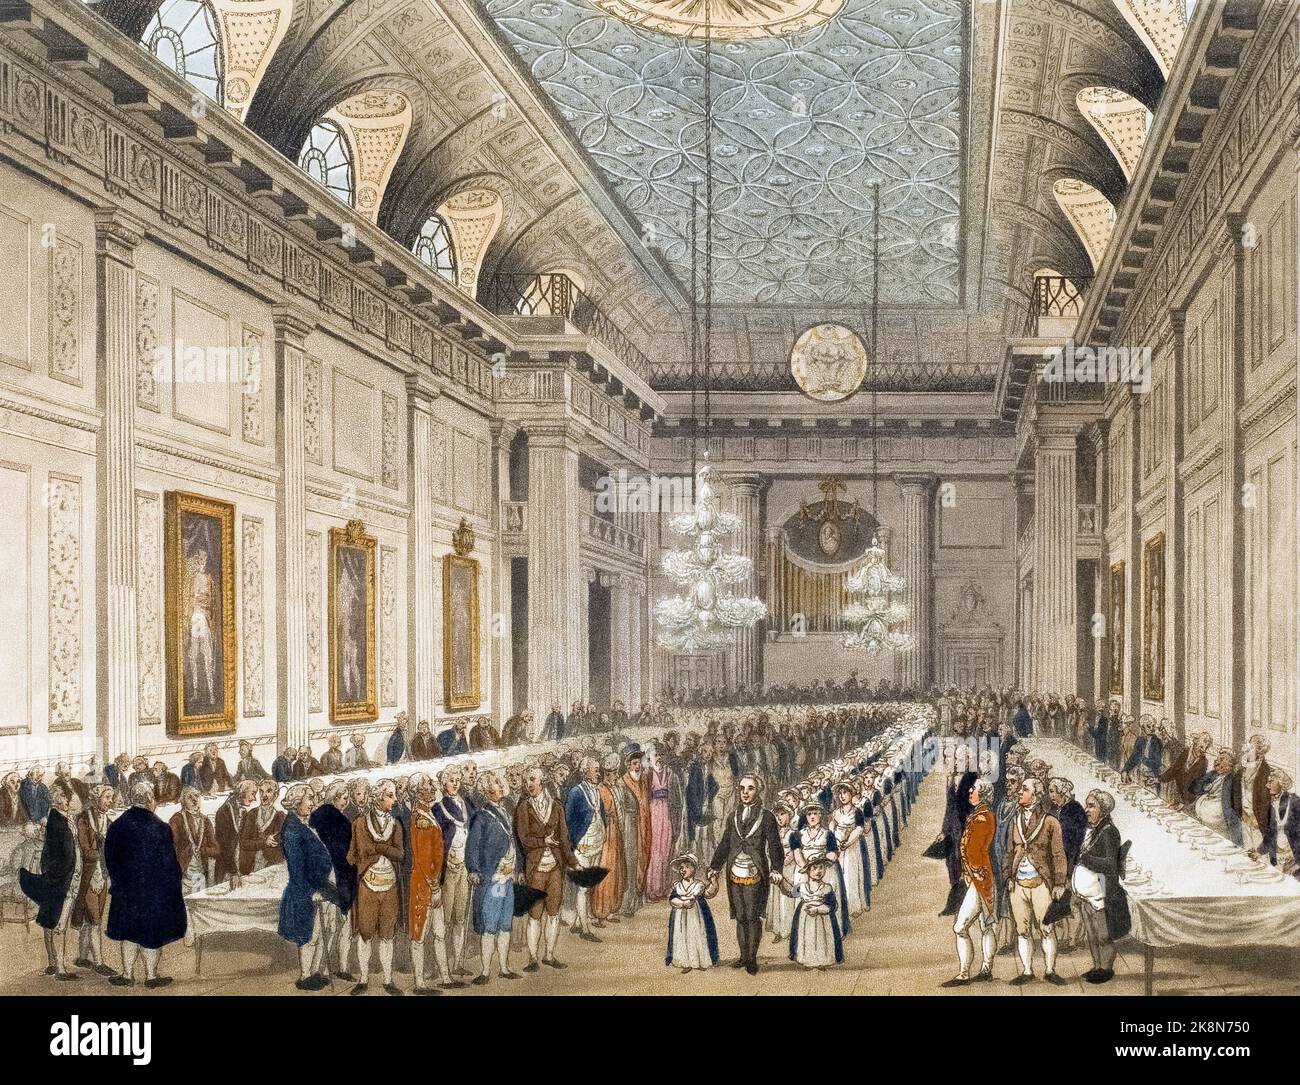 Freemasons' Hall, Great Queen Street.  Circa 1808.  After a work by August Pugin and Thomas Rowlandson in the Microcosm of London, published in three volumes between 1808 and 1810 by Rudolph Ackermann.   Pugin was the artist responsible for the architectural elements in the Microcosm pictures; Thomas Rowlandson was hired to add the lively human figures. Stock Photo